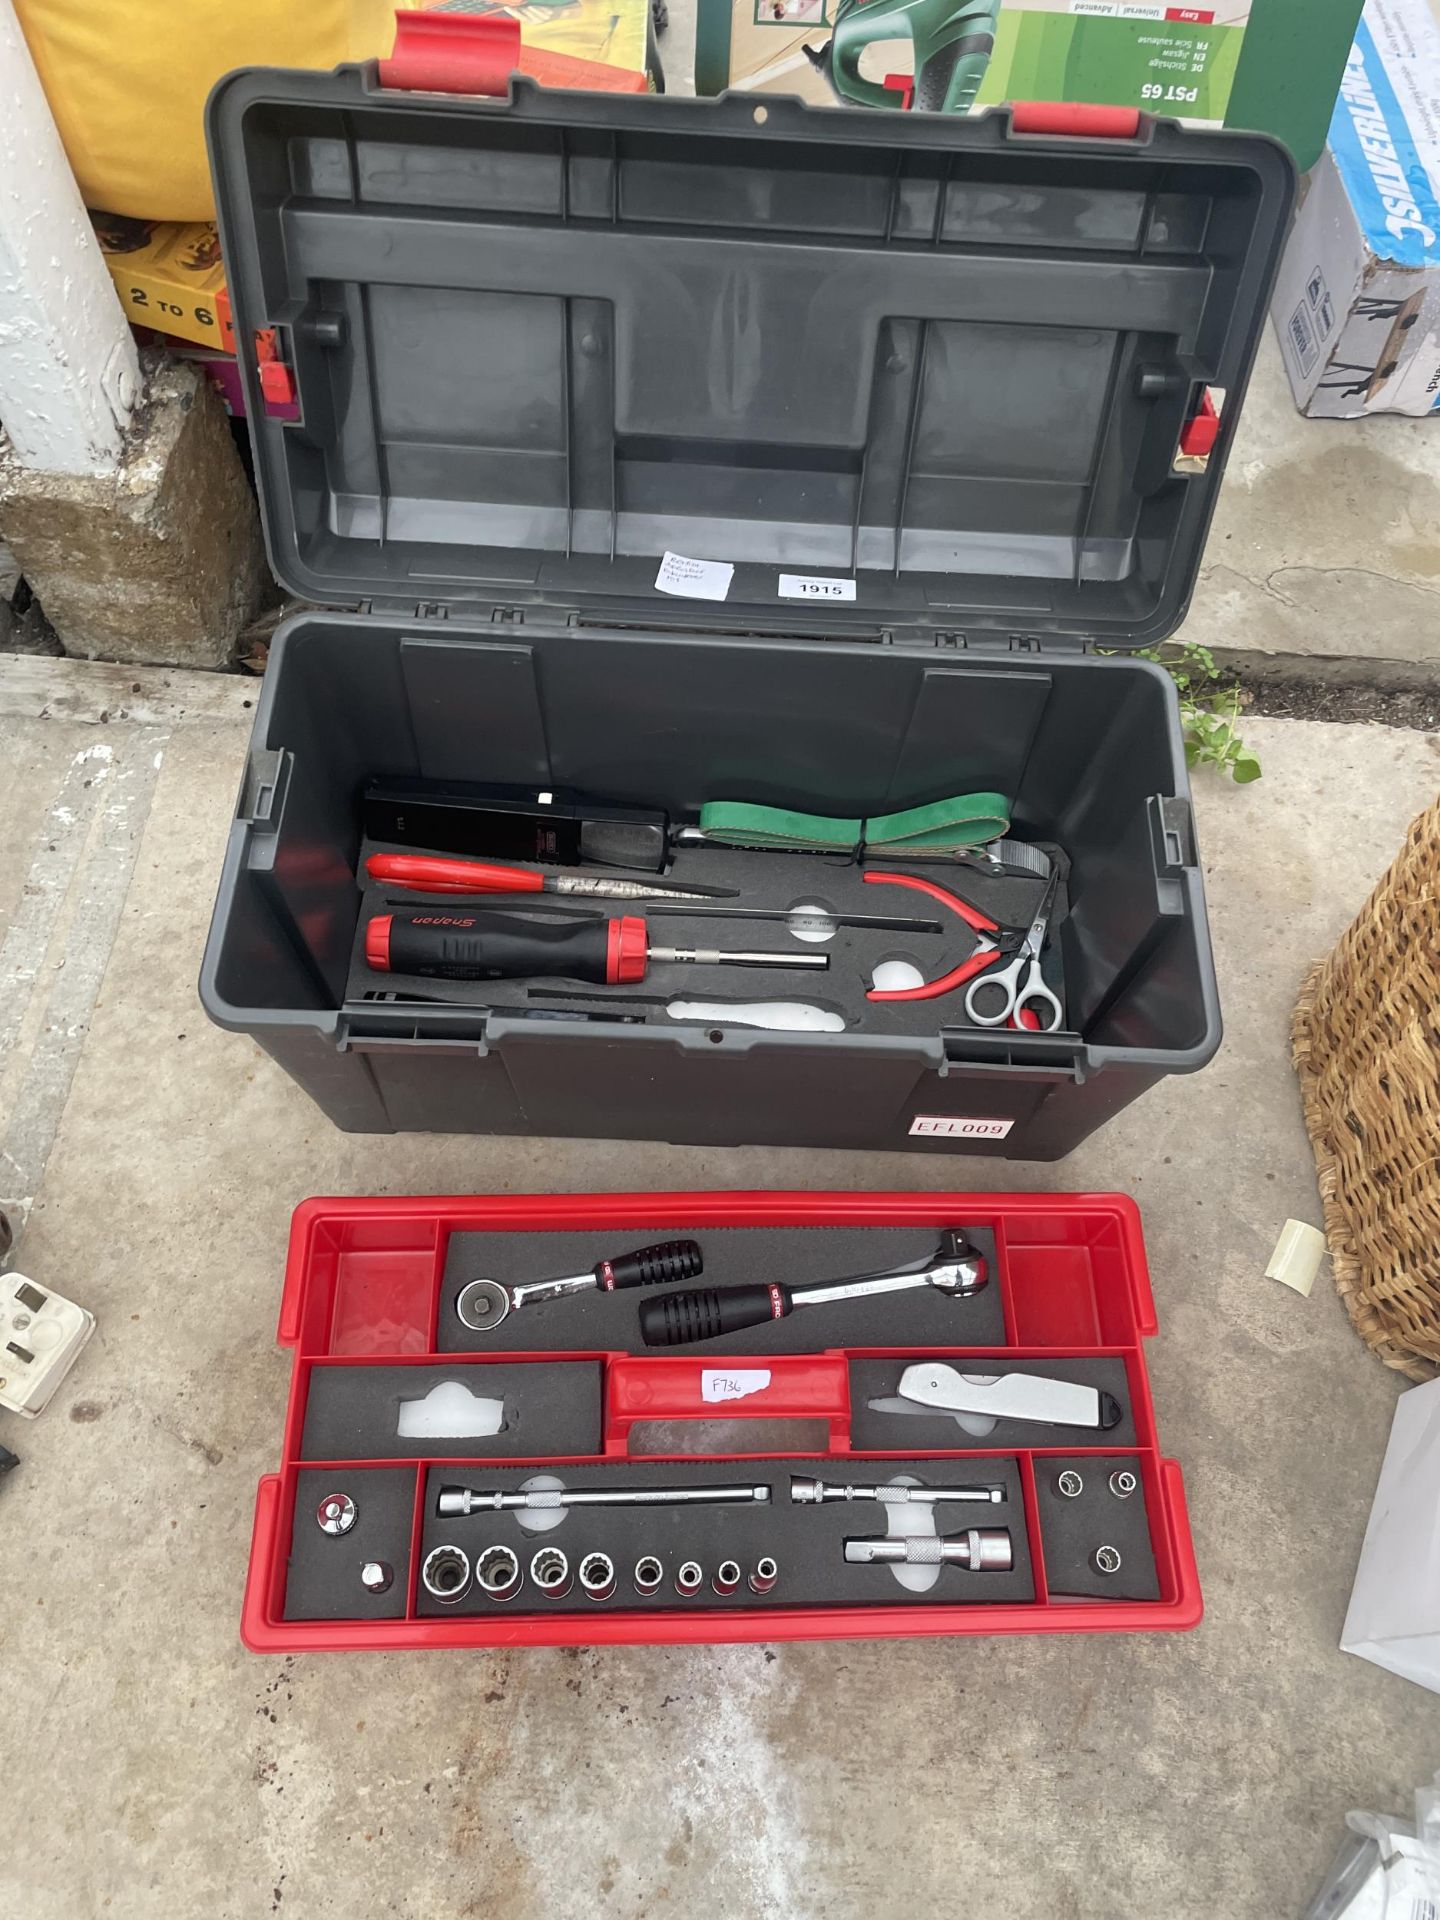 A TOOL BOX CONTAINING A BRITISH AREOSPACE ENGINEERS KIT TO INCLUDE SOME SNAP ON TOOLS